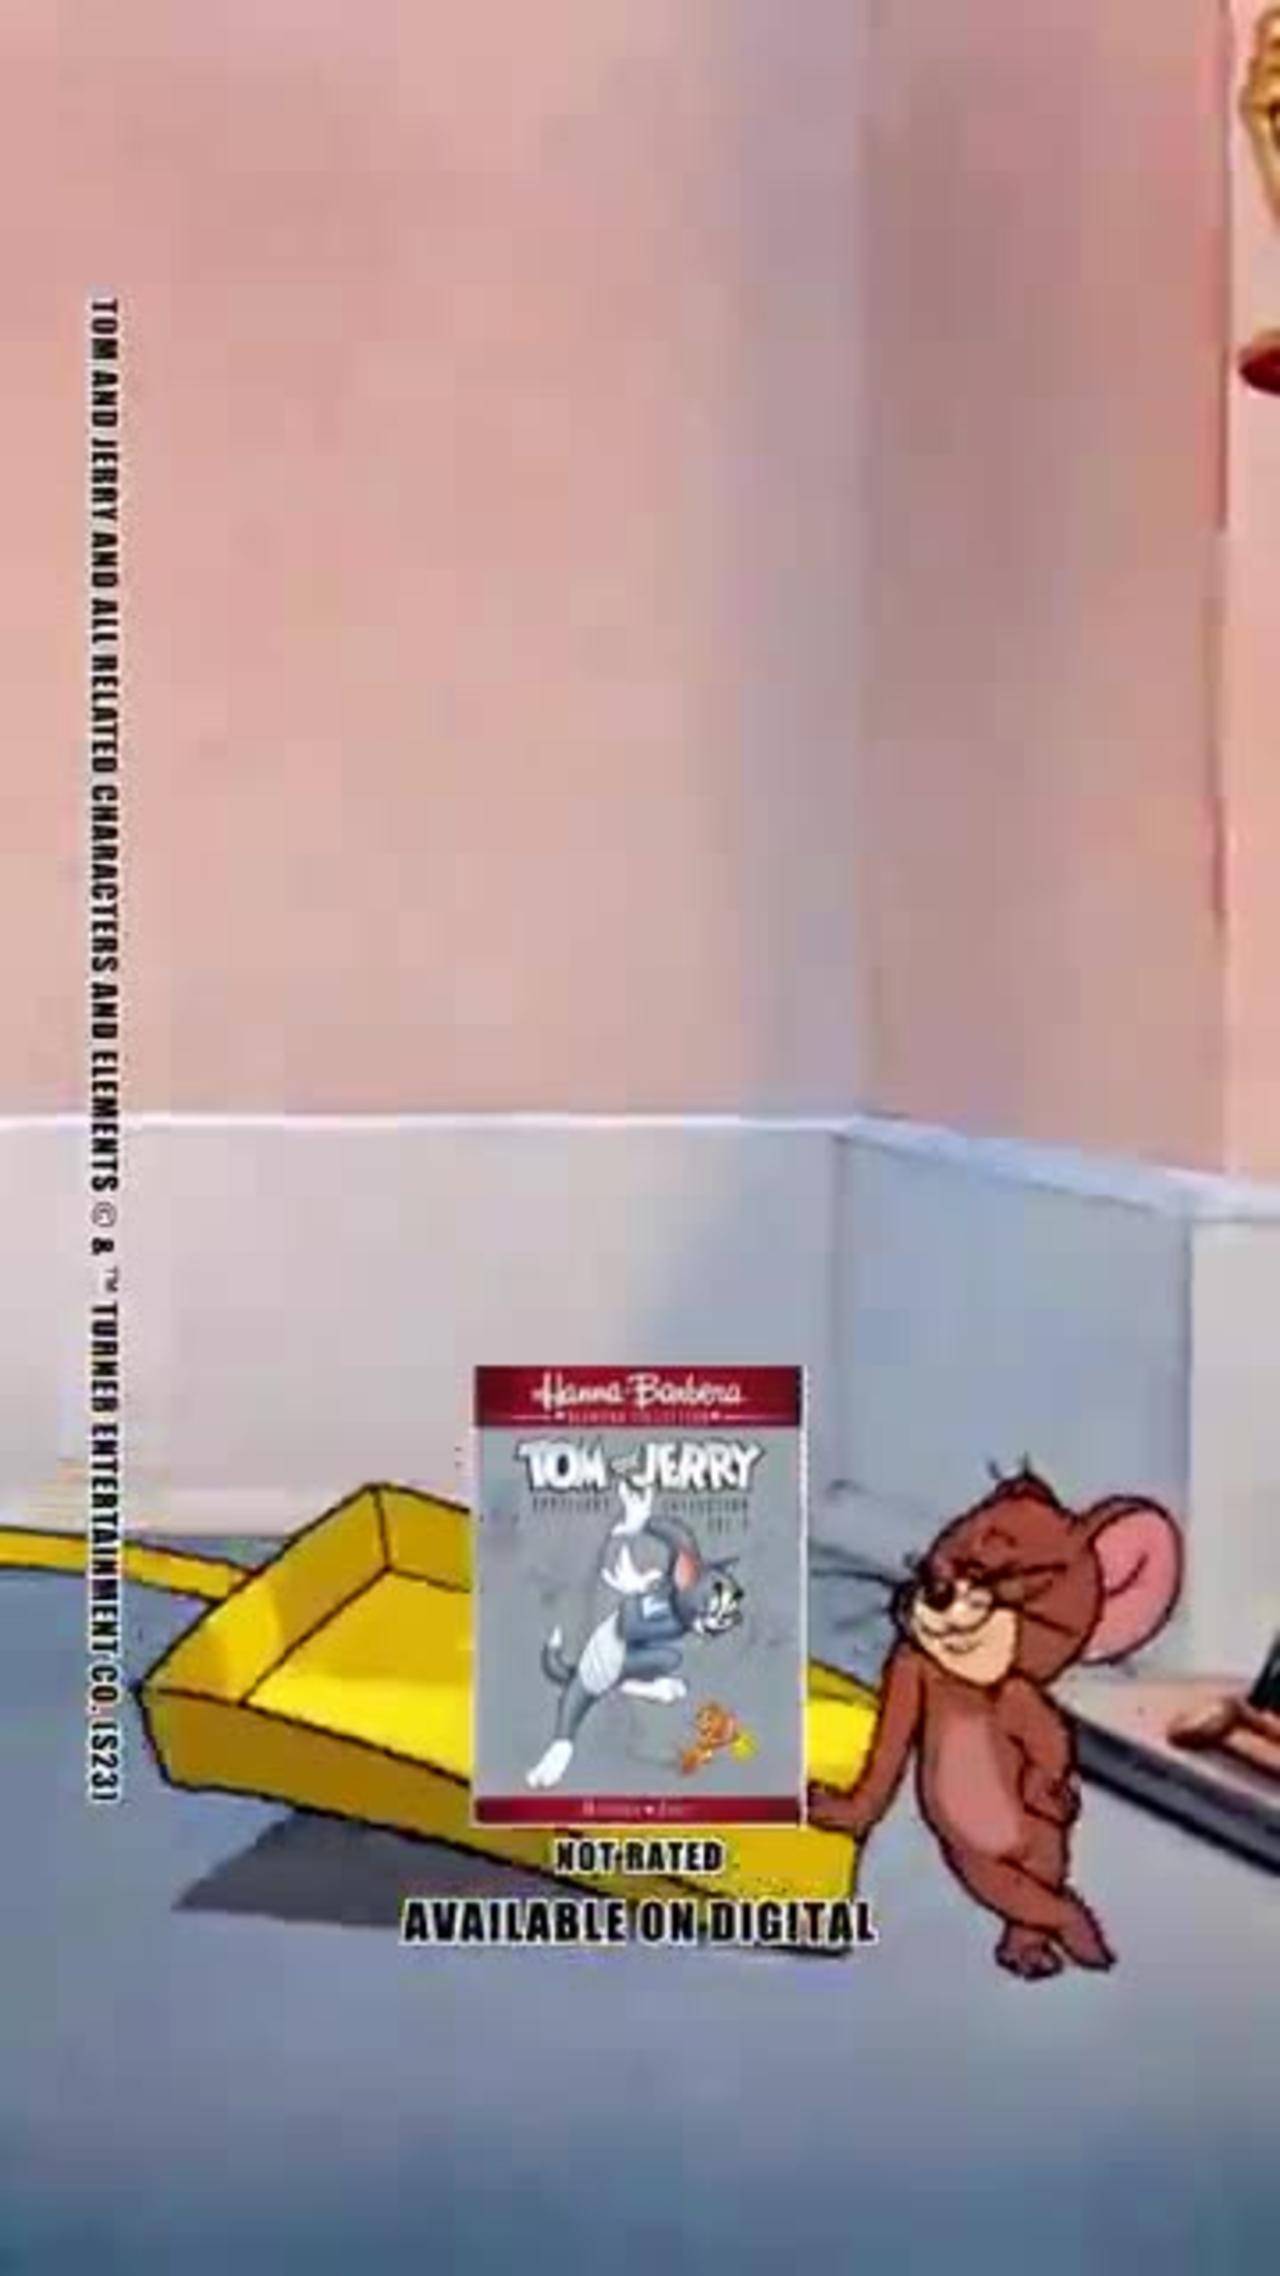 Tom & Jerry made my day ❤️